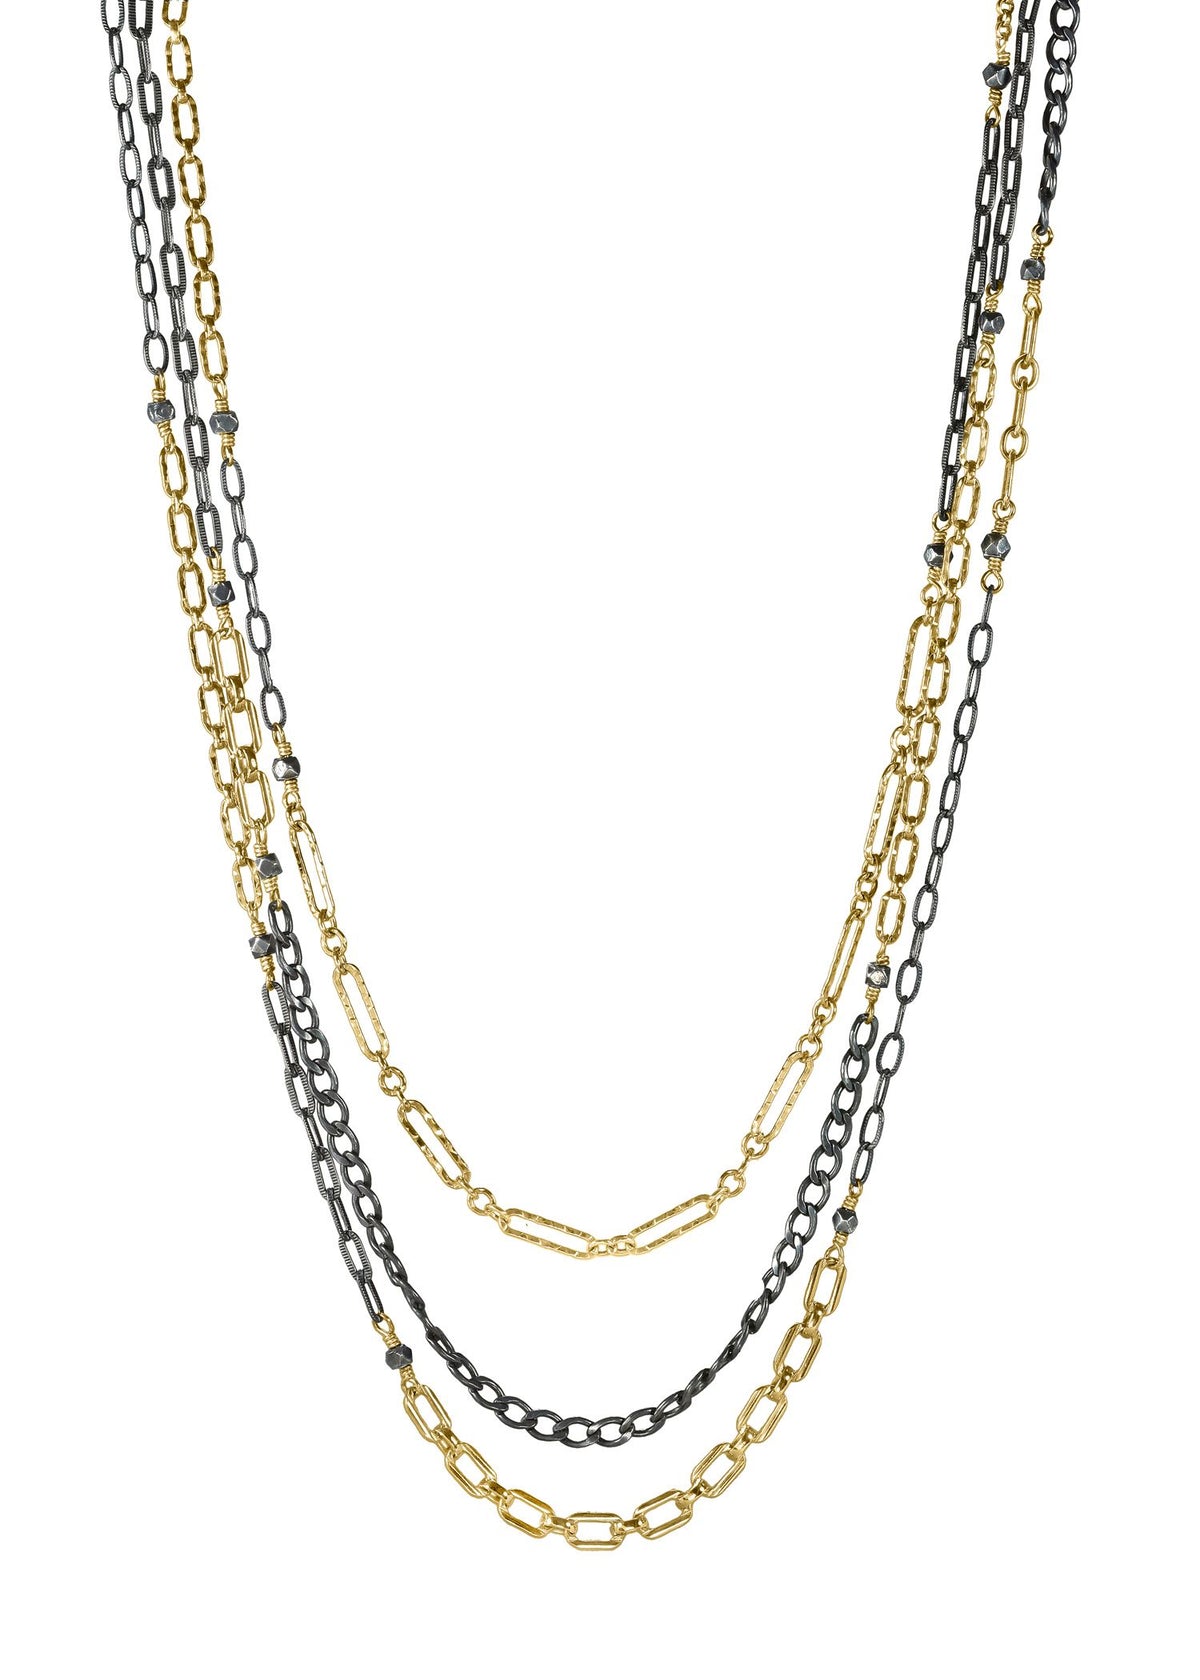 14k gold fill Blackened sterling silver Mixed metal Necklace chains measure 14-1/2”, 15-1/2” and 16-1/4” in length 14-1/2&quot; (inner) 15-1/2&quot; (middle) 16-1/4&quot; (outer) Handmade in our Los Angeles studio